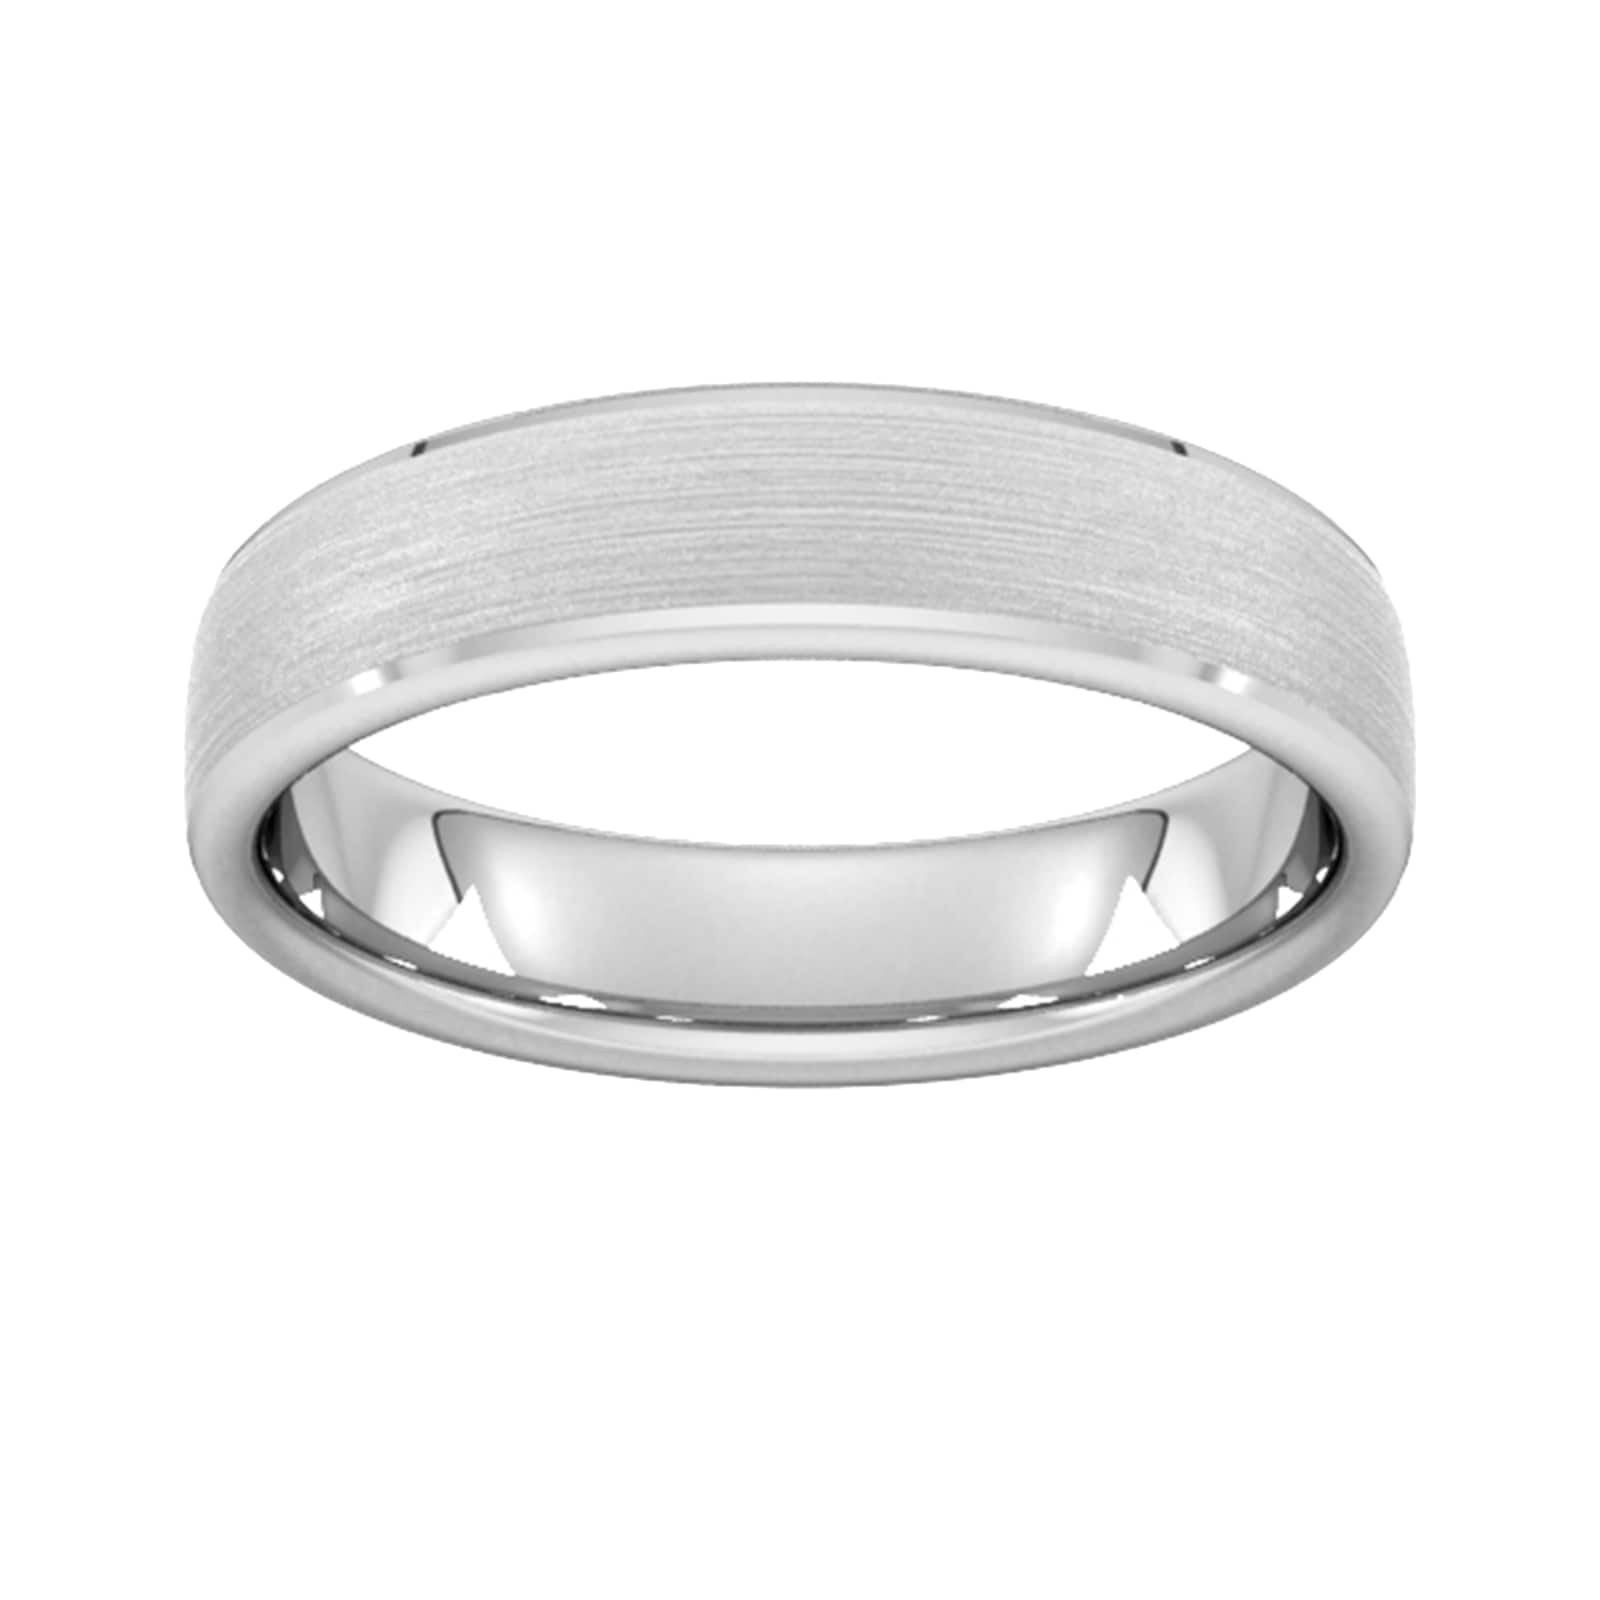 5mm Slight Court Standard Polished Chamfered Edges With Matt Centre Wedding Ring In Platinum - Ring Size W